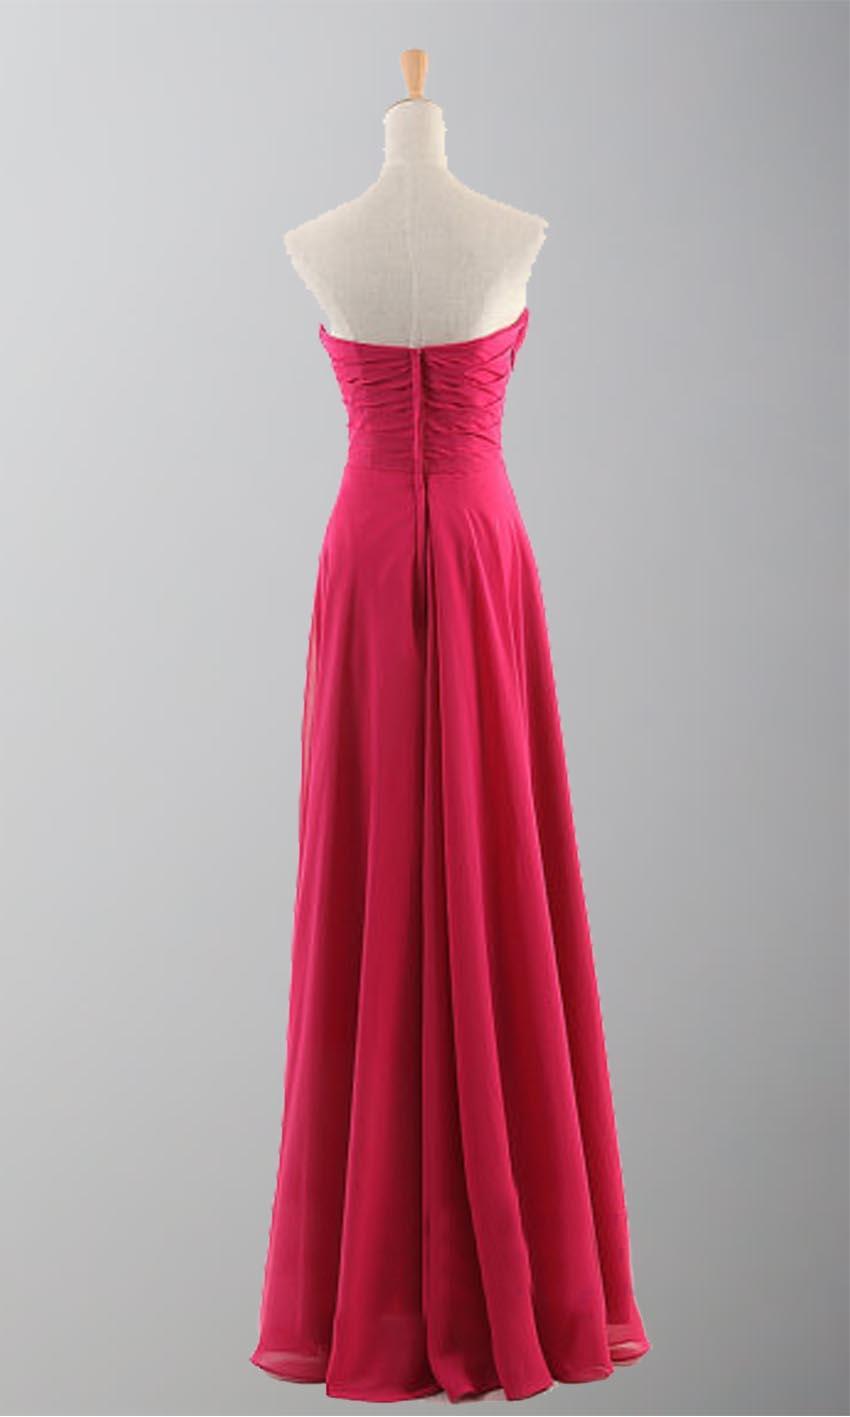 Mariage - Flame Sweetheart Empire Waist Long Prom Dresses KSP172 [KSP172] - £84.00 : Cheap Prom Dresses Uk, Bridesmaid Dresses, 2014 Prom & Evening Dresses, Look for cheap elegant prom dresses 2014, cocktail gowns, or dresses for special occasions? kissprom.co.uk o